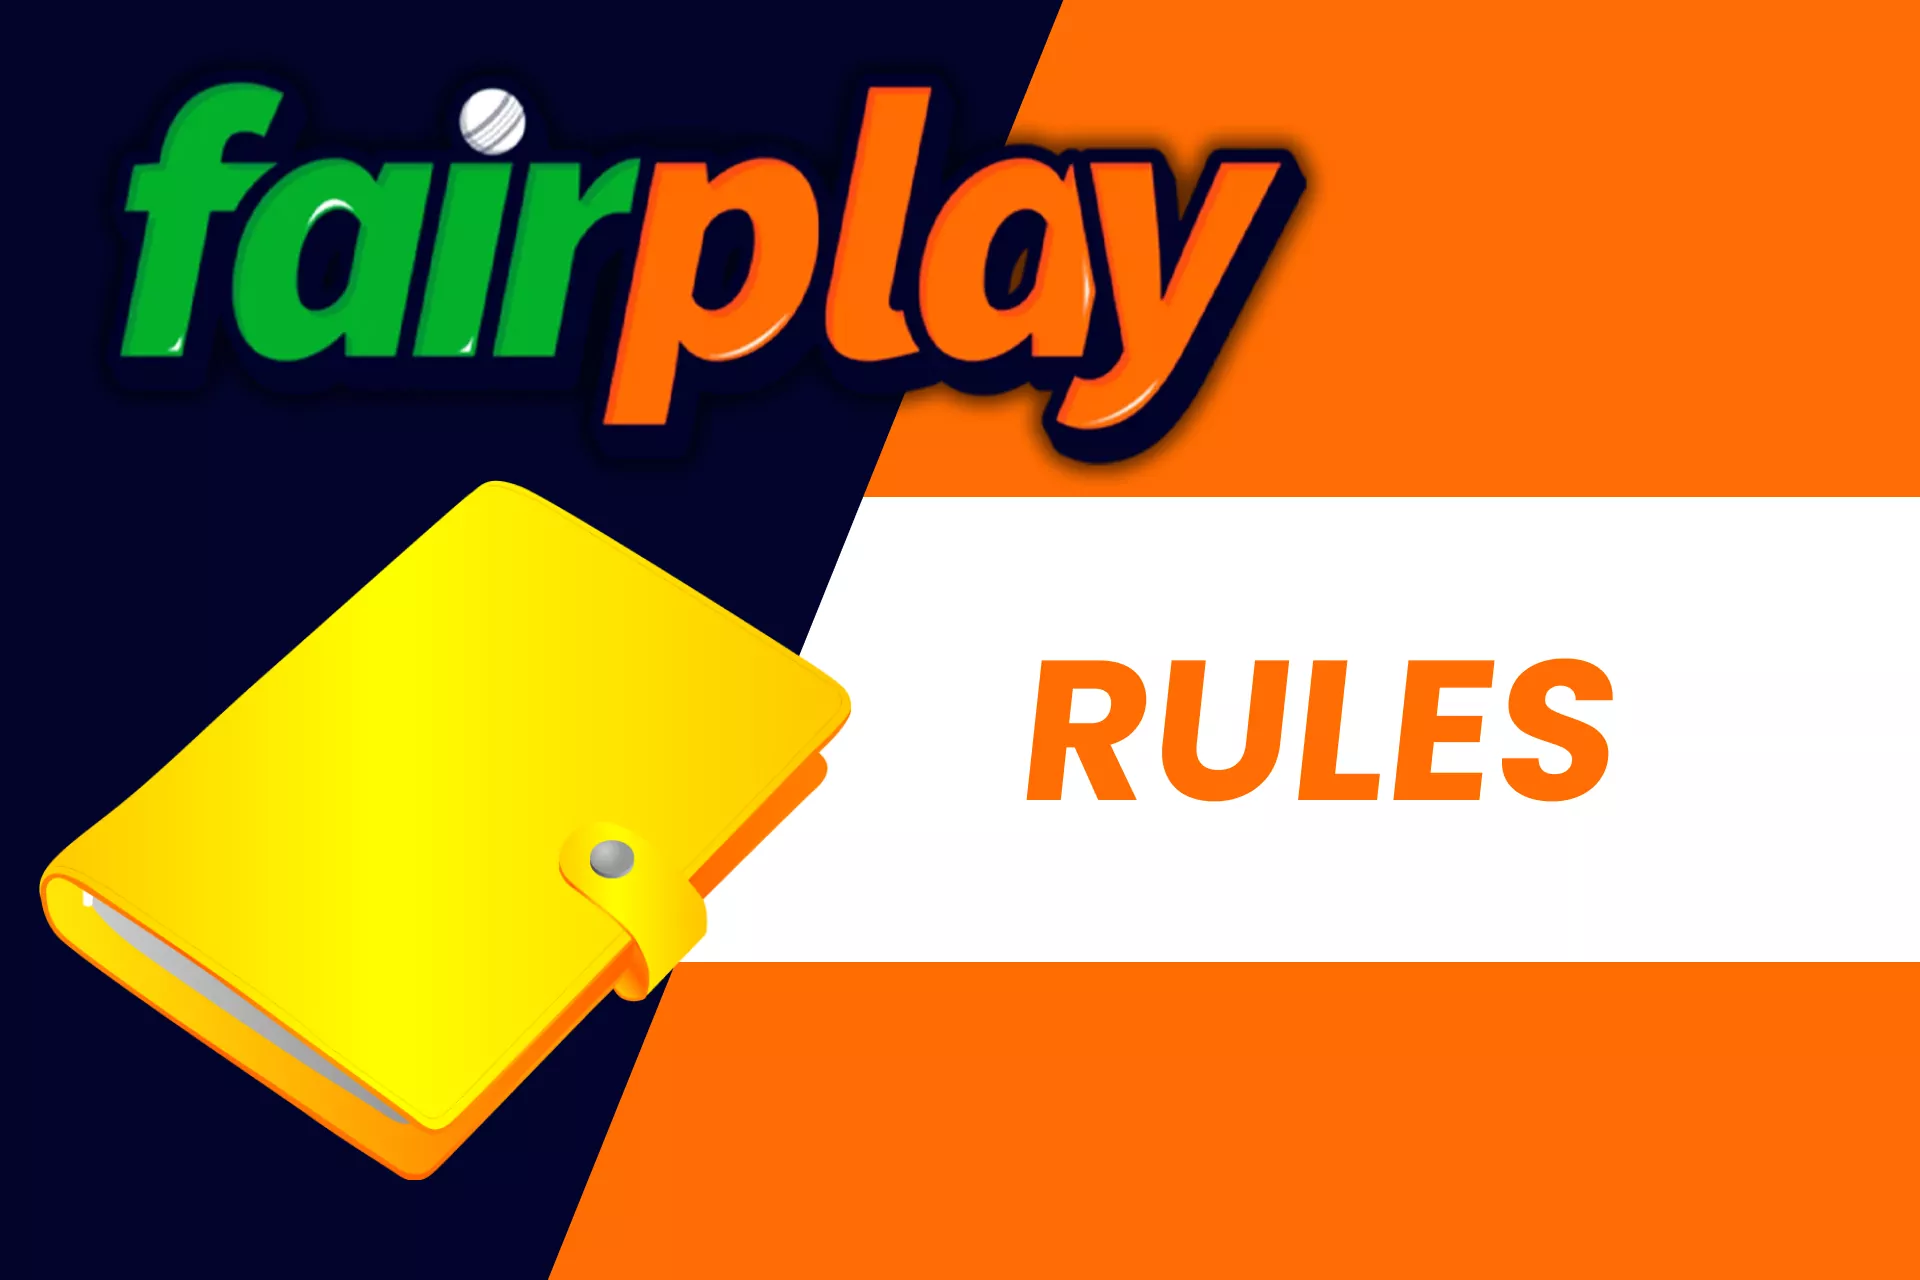 Learn the rules for using the Fairplay service.